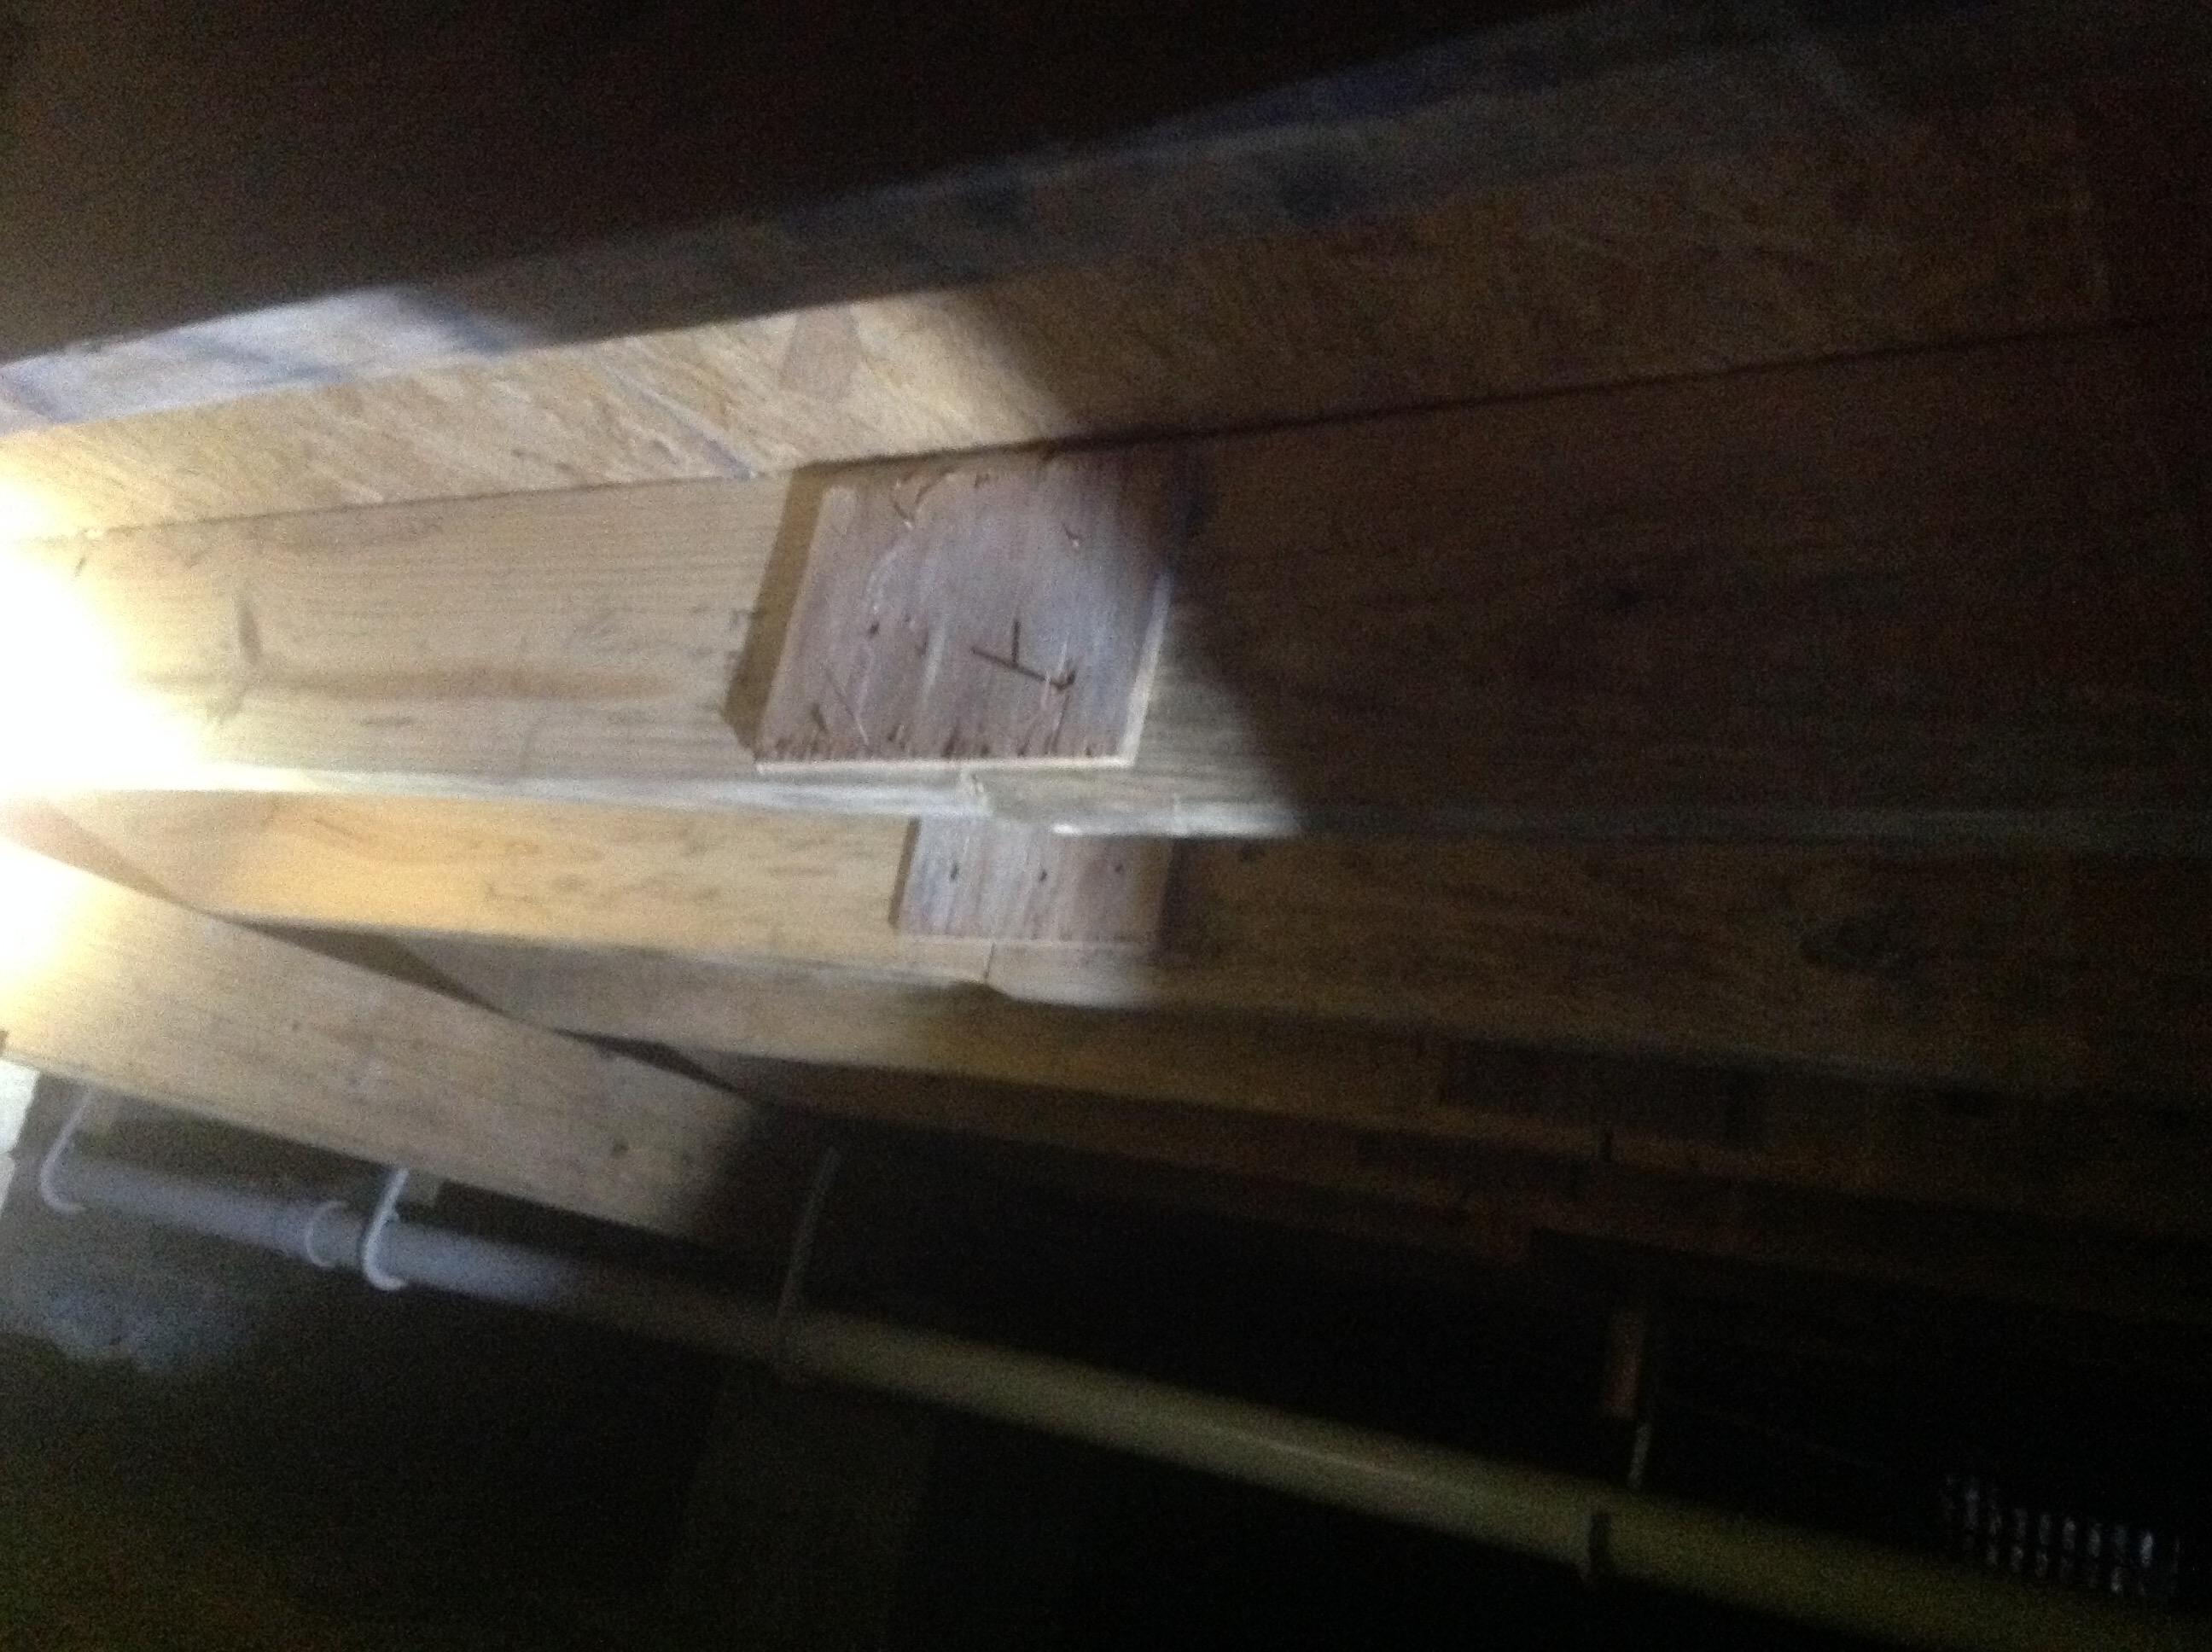 These floor joists were butted together with no support structure and tied together with plywood. And the joists were under sized. This is a sub standard building practice and is a safety hazard. Found by Bumgardner Inspection Services in Miamisburg Ohio.